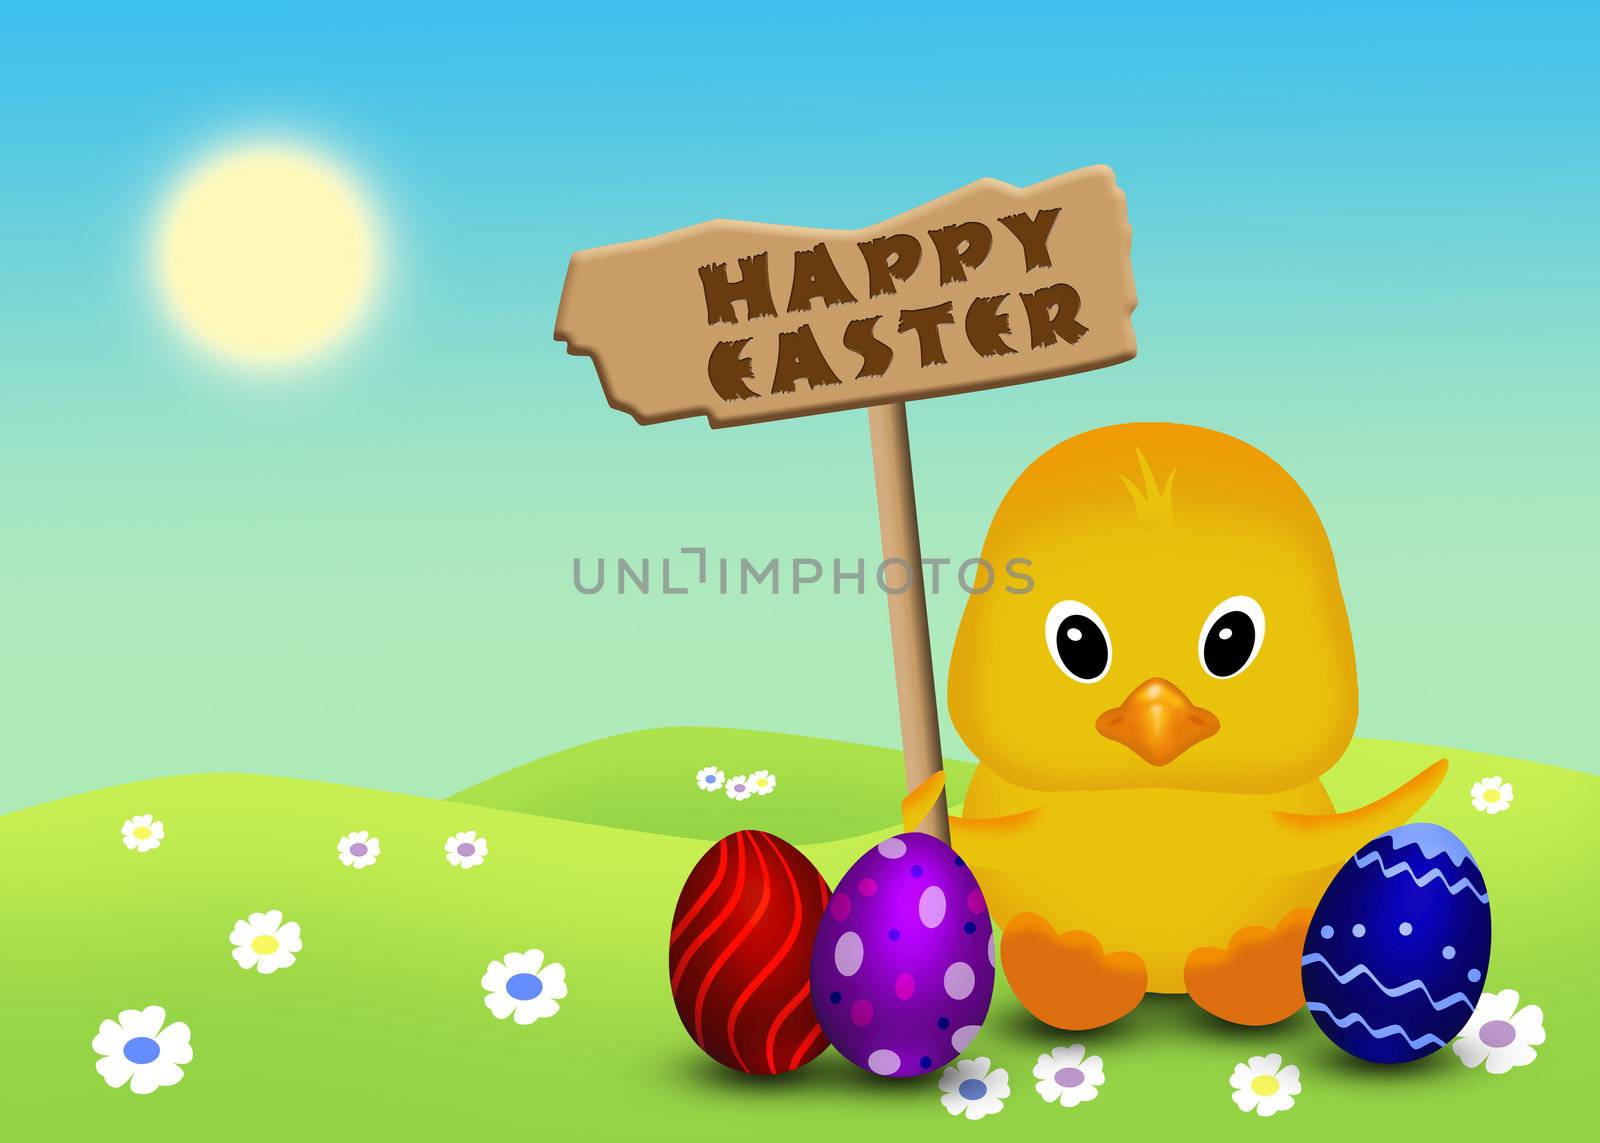 Cute Easter illustration: little chick holding a wooden sign with Easter greeting and sitting in a flower field next to colored Easter eggs.